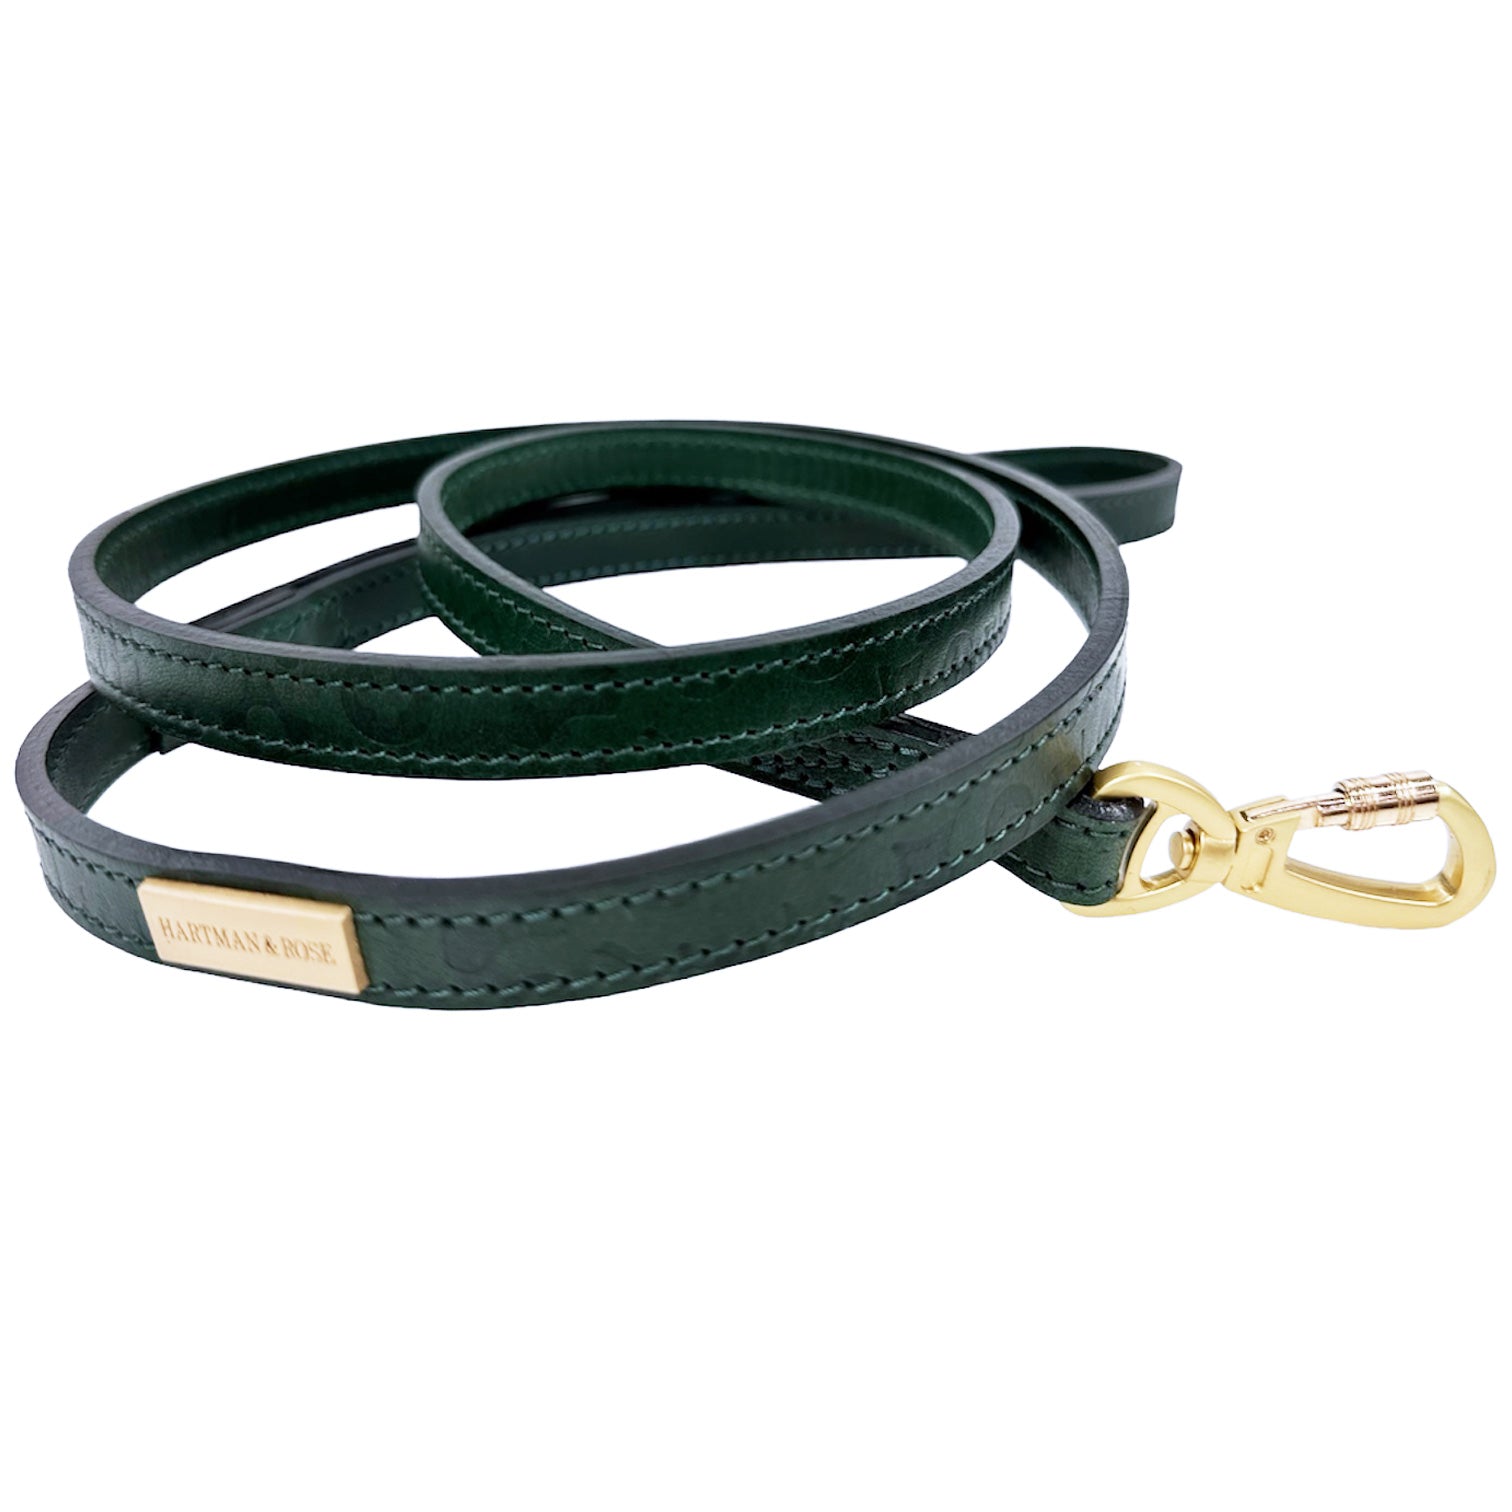 H&R Embossed Dog Leash in Forest Green